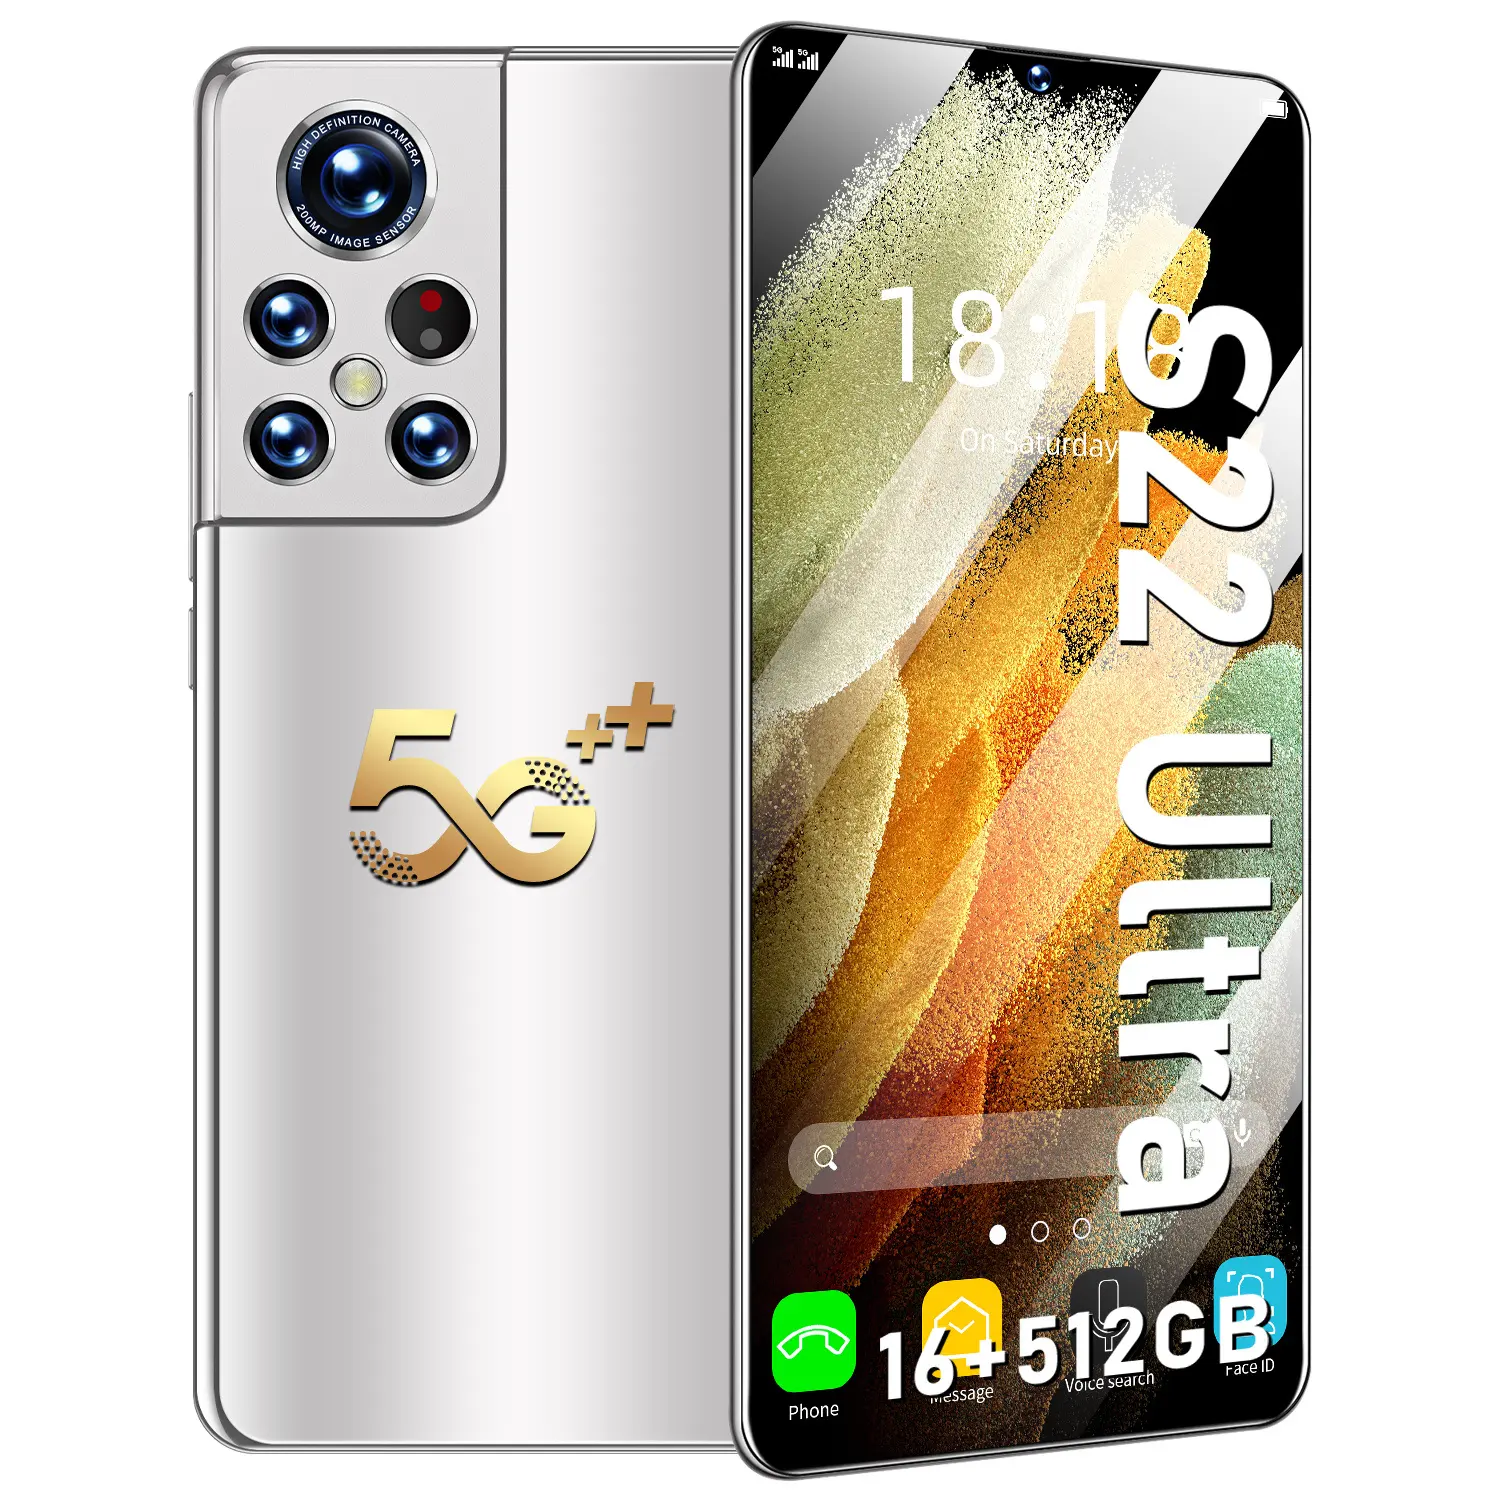 S22 U1tra Smartphone 16+512GB Android 5G Mobile Phones Dual SIM Cards Long Standby 6.9 inch Full Screen Phones